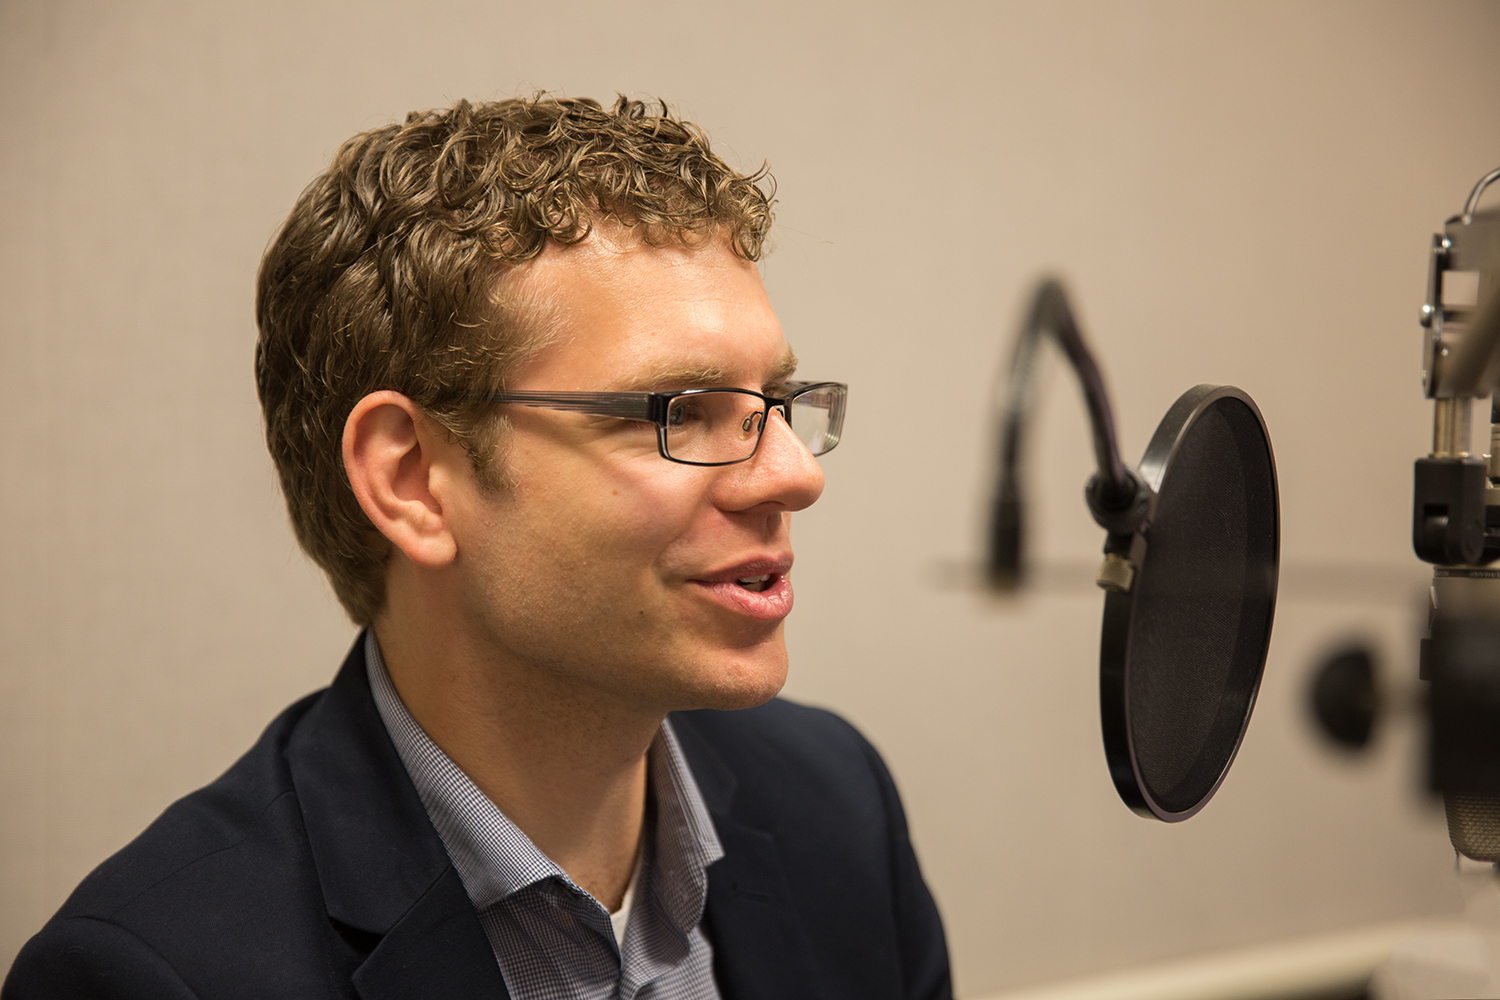 Mels de Zeeuw, a research analyst of the Community and Economic Development department at the Atlanta Fed, at the recording of a podcast episode